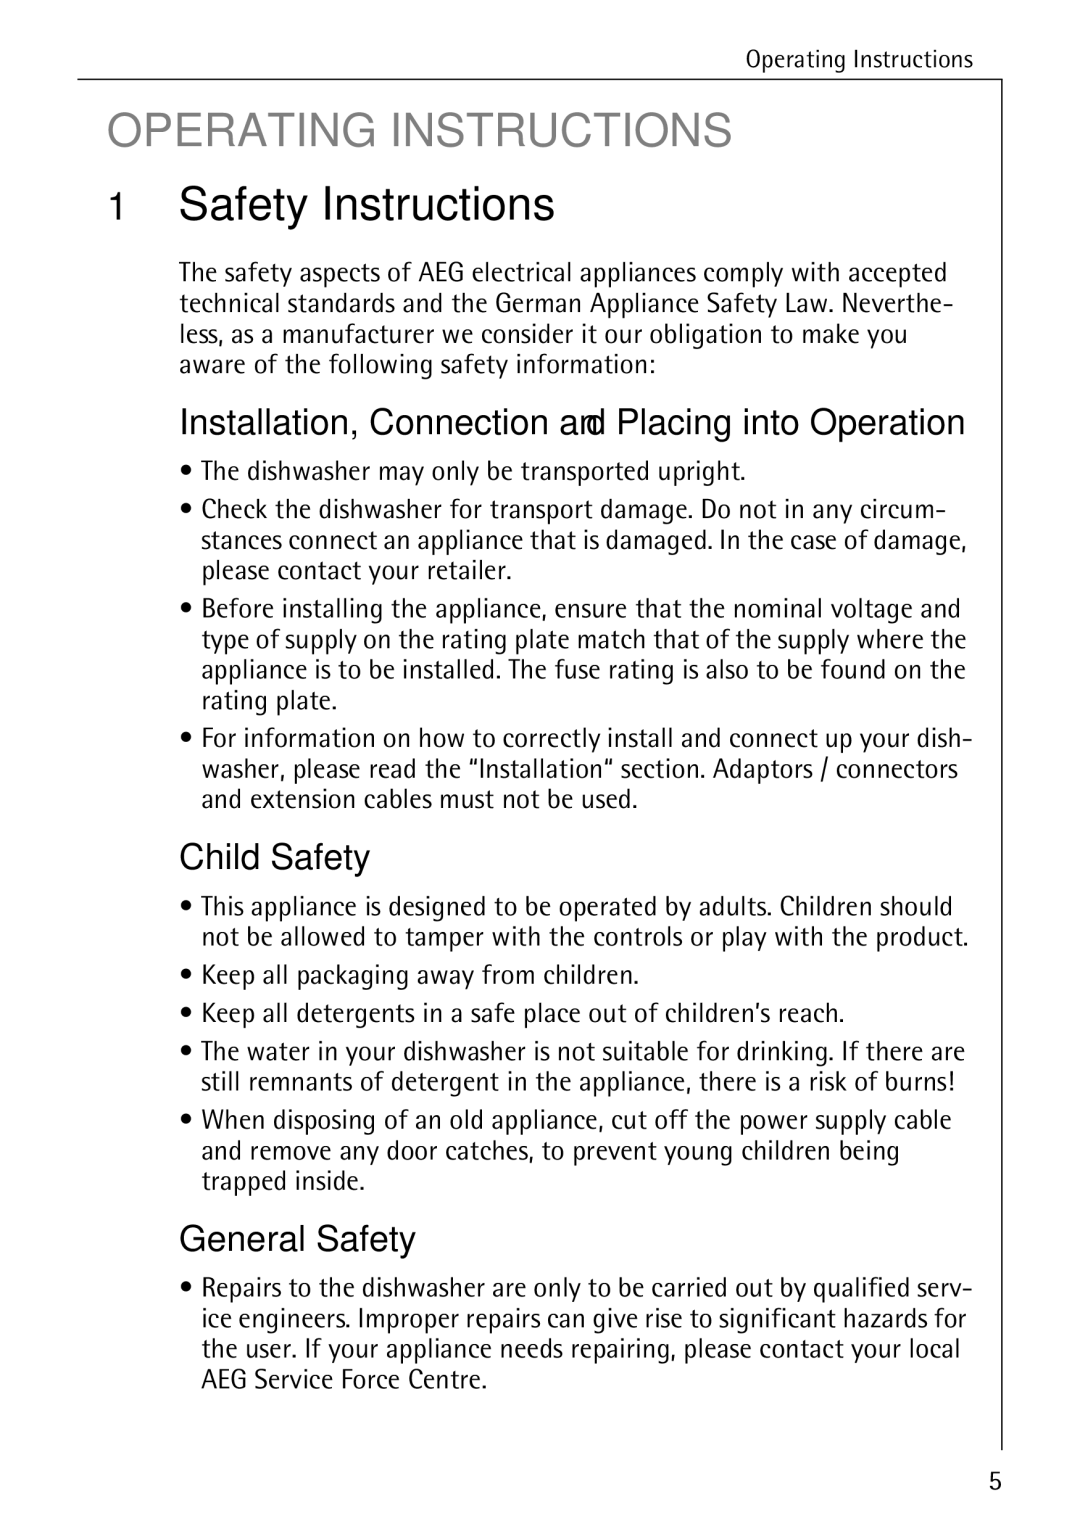 Electrolux 44050 VI Safety Instructions, Installation, Connection and Placing into Operation, Child Safety, General Safety 